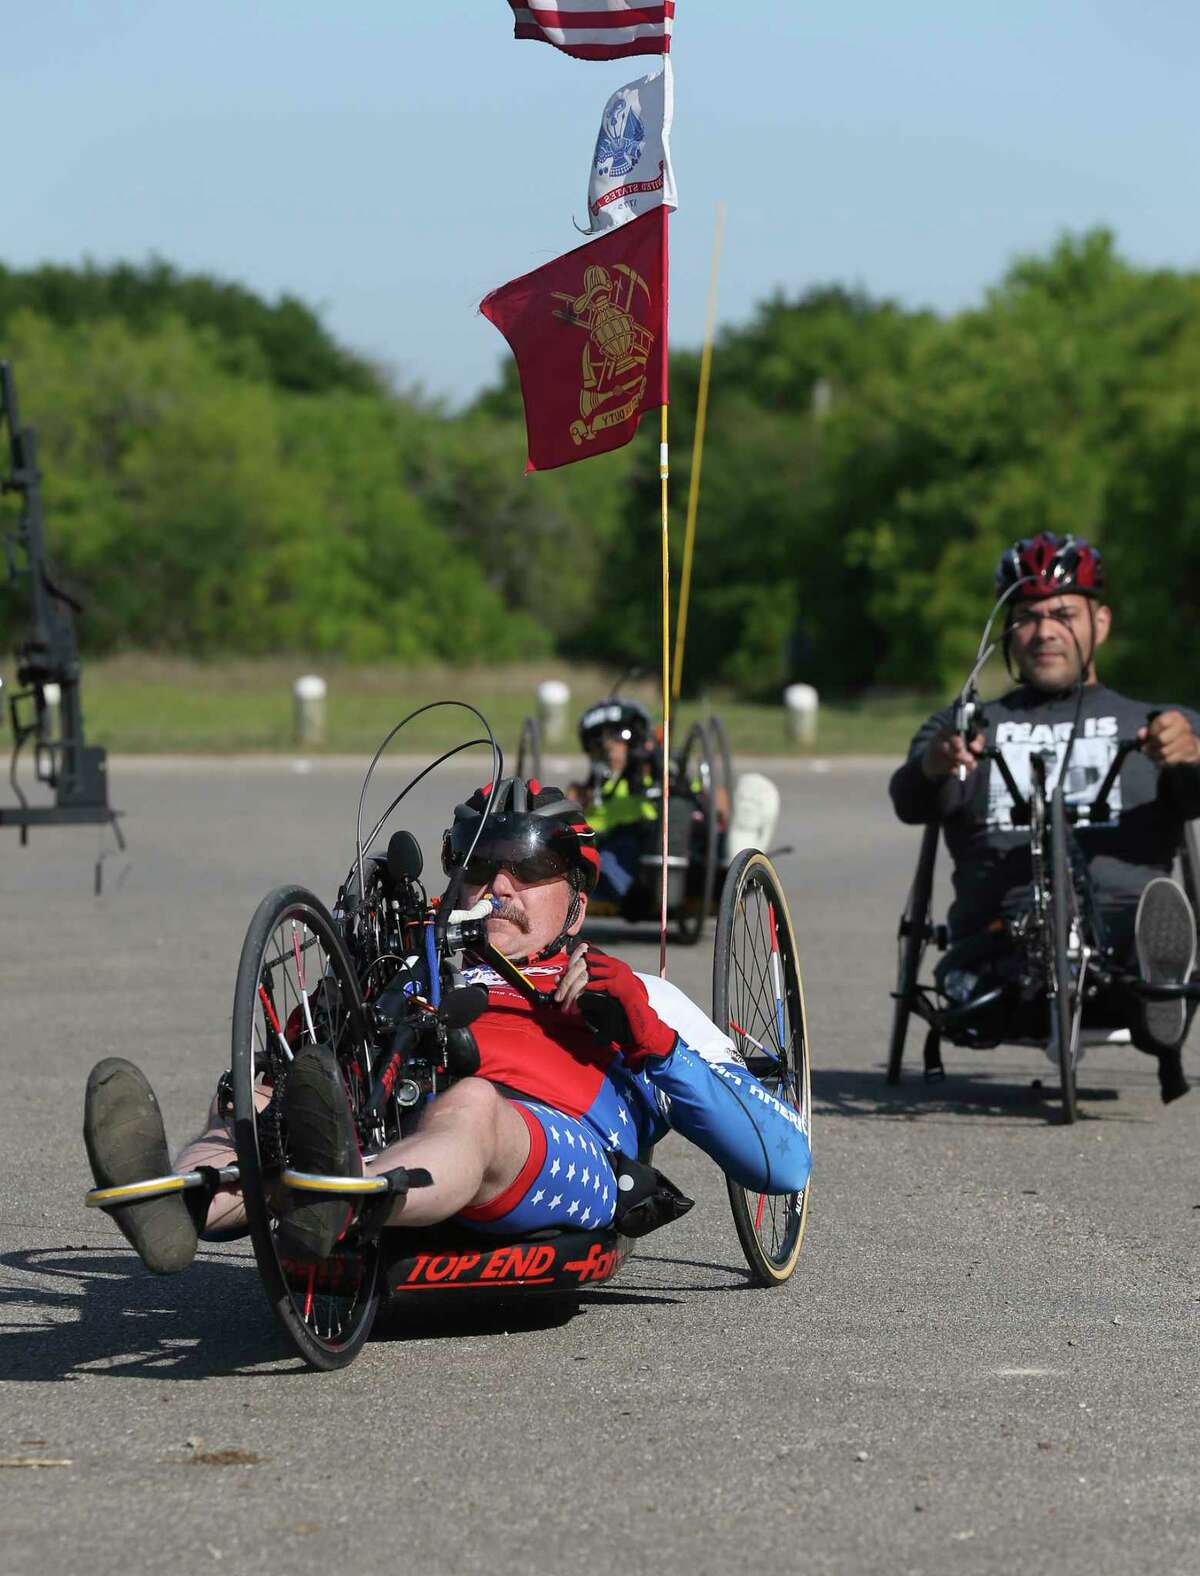 James Madison, 50, participates in a three-day cycling camp for wounded, ill and injured service members and veterans at McAllister Park, Tuesday, April 10, 2018. South Texas VA Recreation Therapy Service partnered with Operation Comfort to host it. The camp started on Monday and provided them an opportunity to ride adaptive cycles to meet their disability. For many, riding a standard bicycle is difficult due to neurological or physical injuries that affect balance and/or mobility. Therapists have found cycling benefits include improved fine motor skills, increased immune system activity, reductions in blood pressures, pain, social anxiety and it also prevents social isolation and depression. Operation Comfort also host weekly bicycle rides on Wednesday.